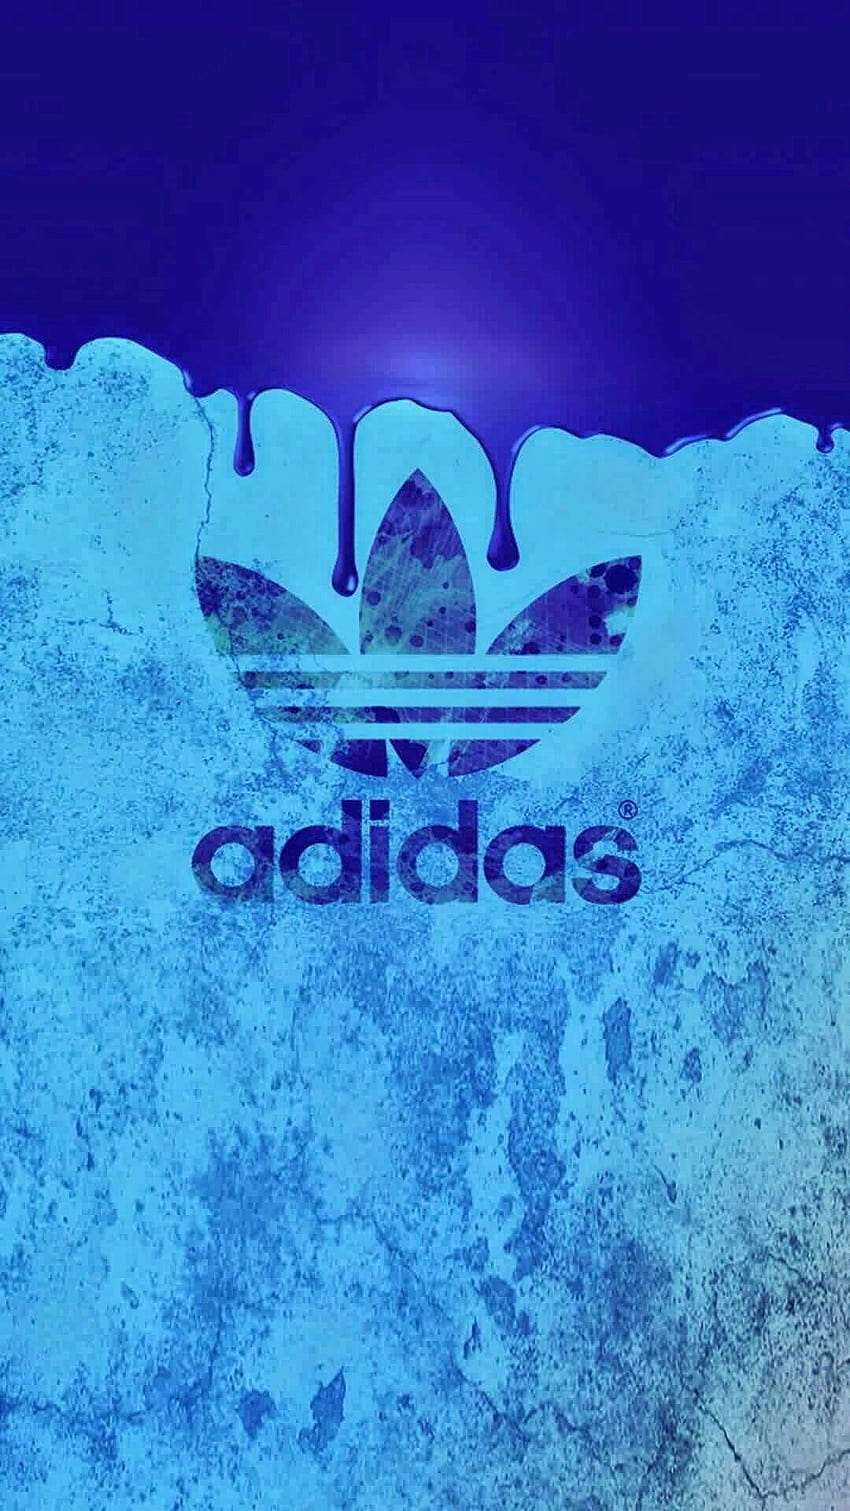 Adidas Screensavers Luxury 580 Best iPhone iPhone Full Backgrounds This Month, luxury brands iphone HD phone wallpaper